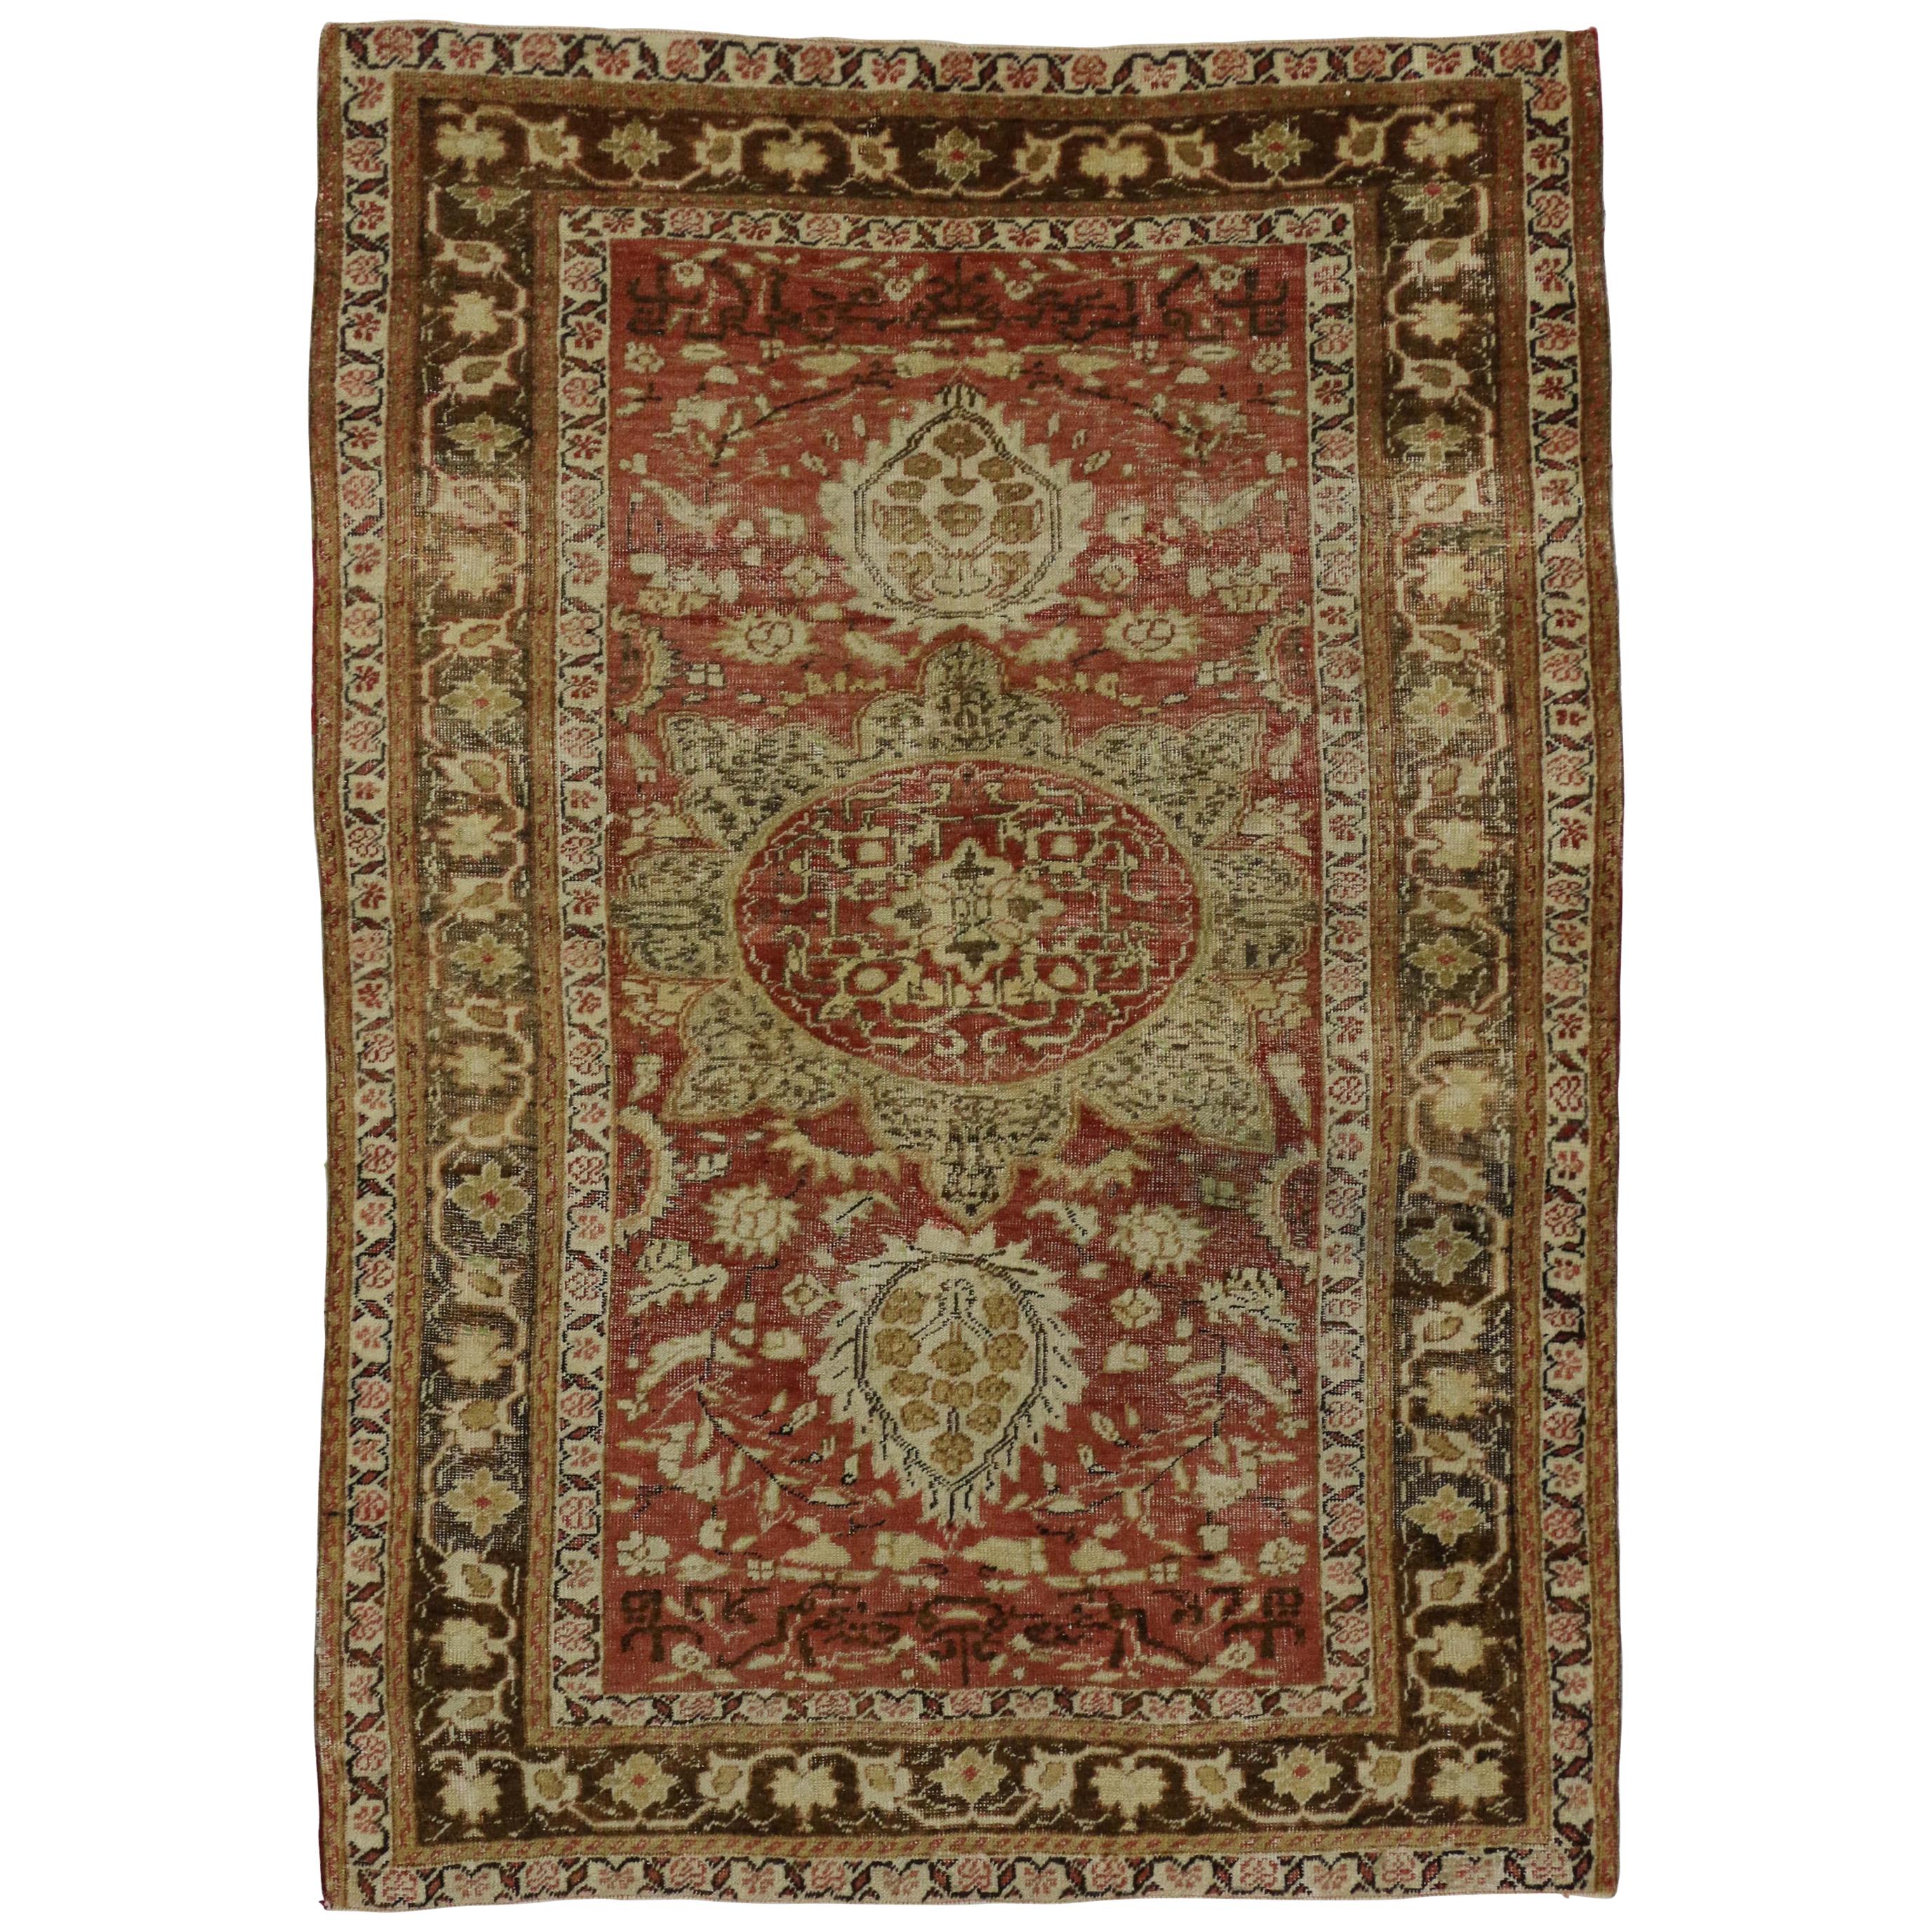 Distressed Vintage Turkish Oushak Rug with Artisan Style, Entry or Foyer Rug